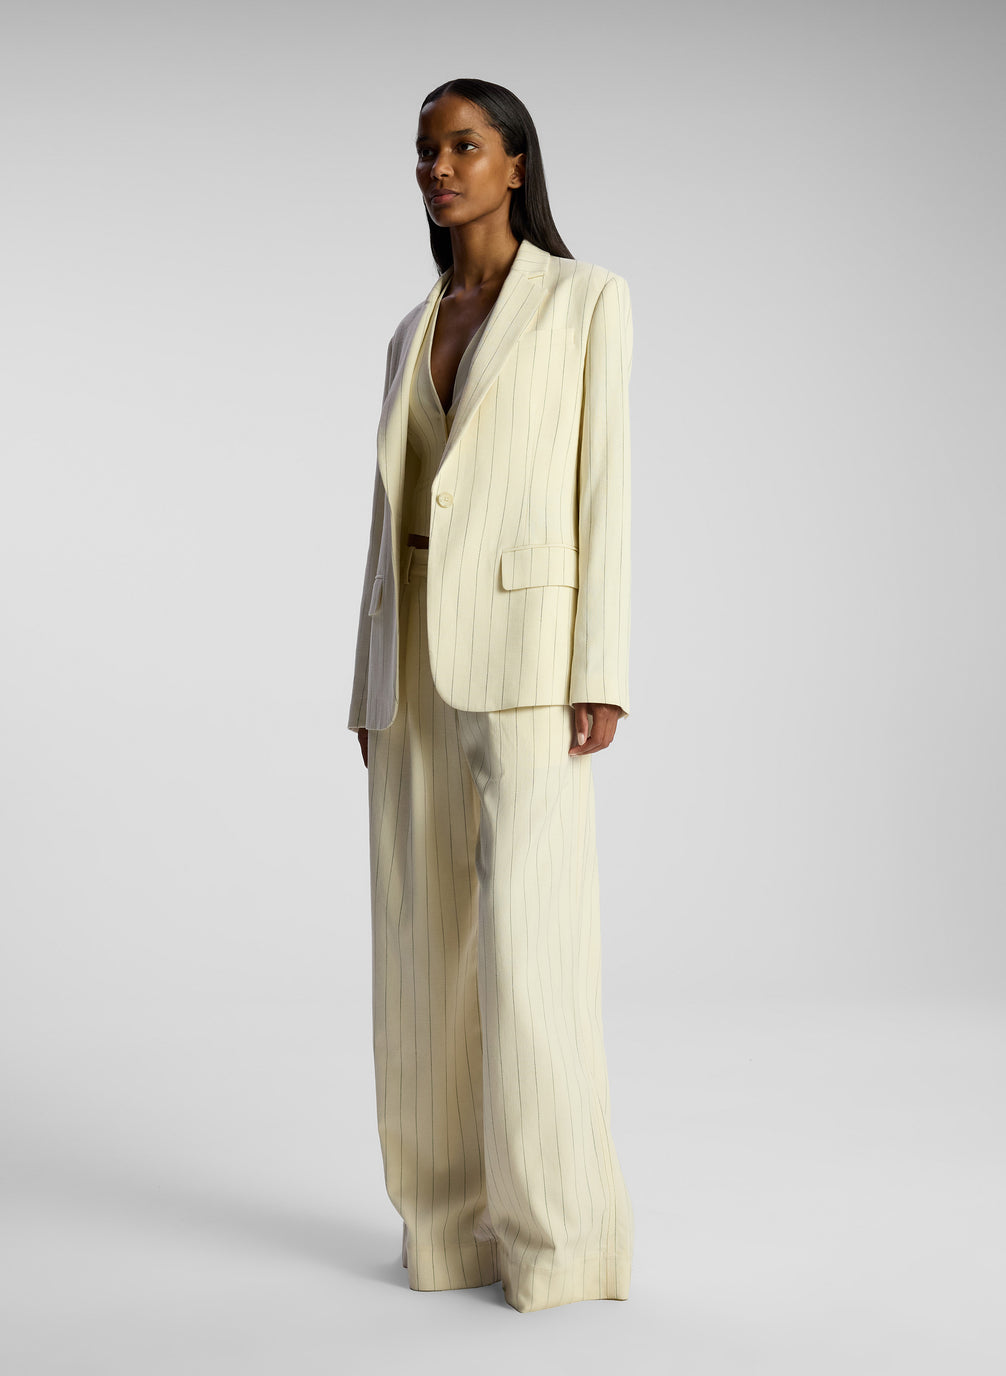 side view of woman wearing cream pinstripe suit